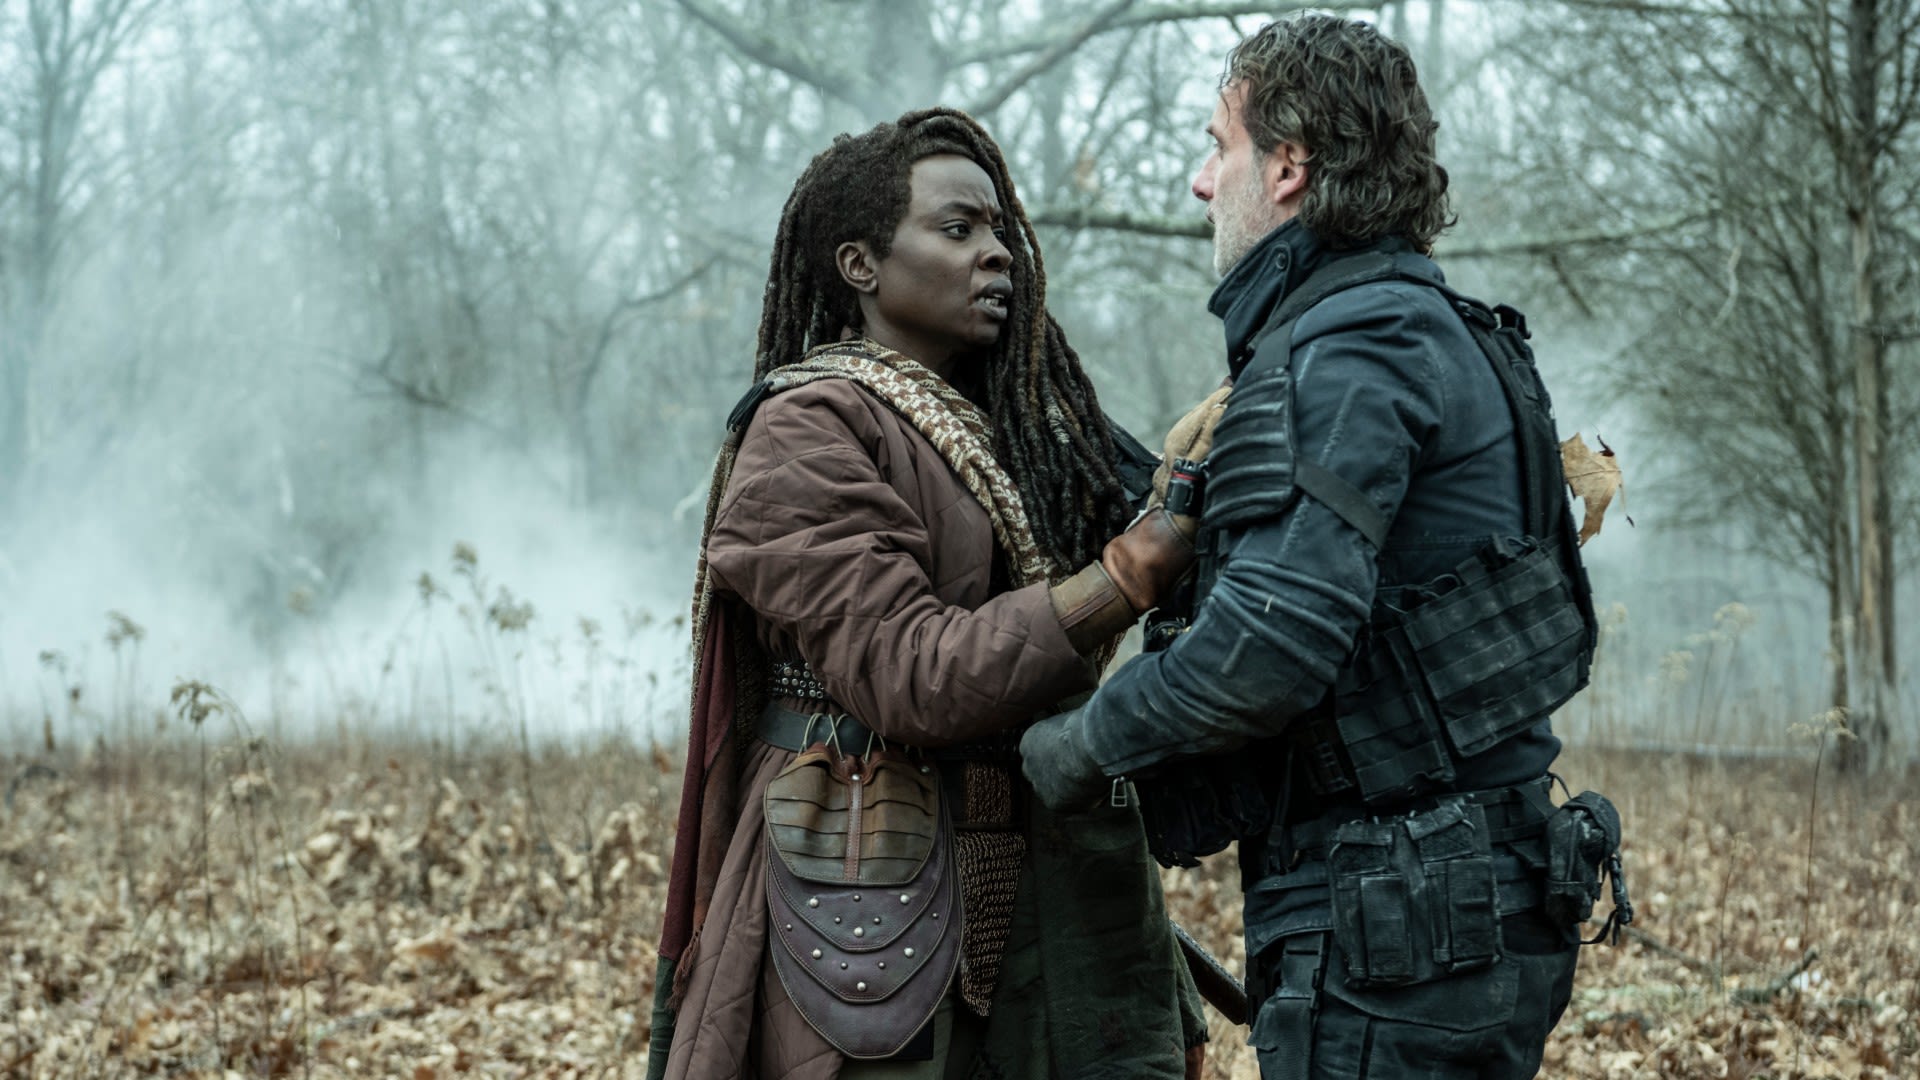 The Walking Dead star Danai Gurira talks that intense Rick and Michonne reunion in The Ones Who Live episode 1